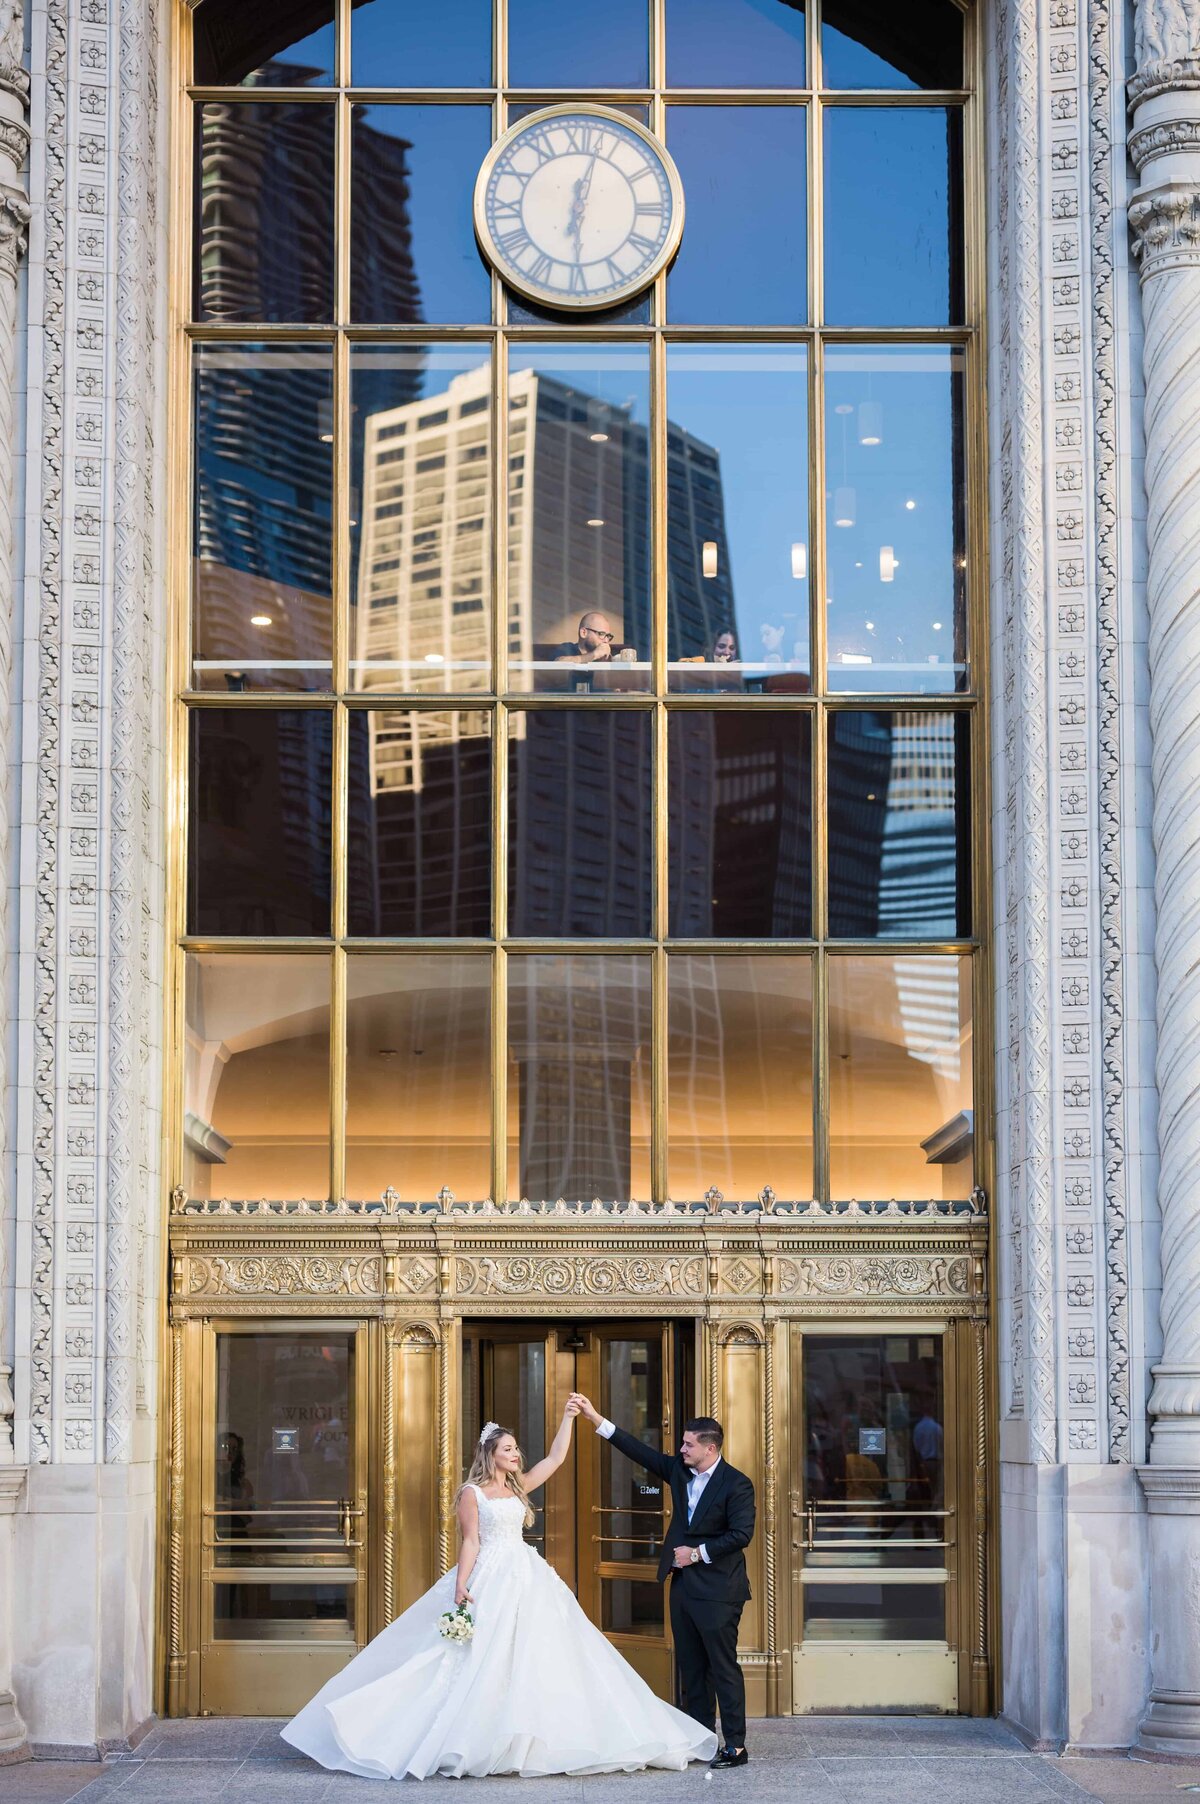 Bride twirling in front of glass doors at the wrigley building in downtown Chicago.